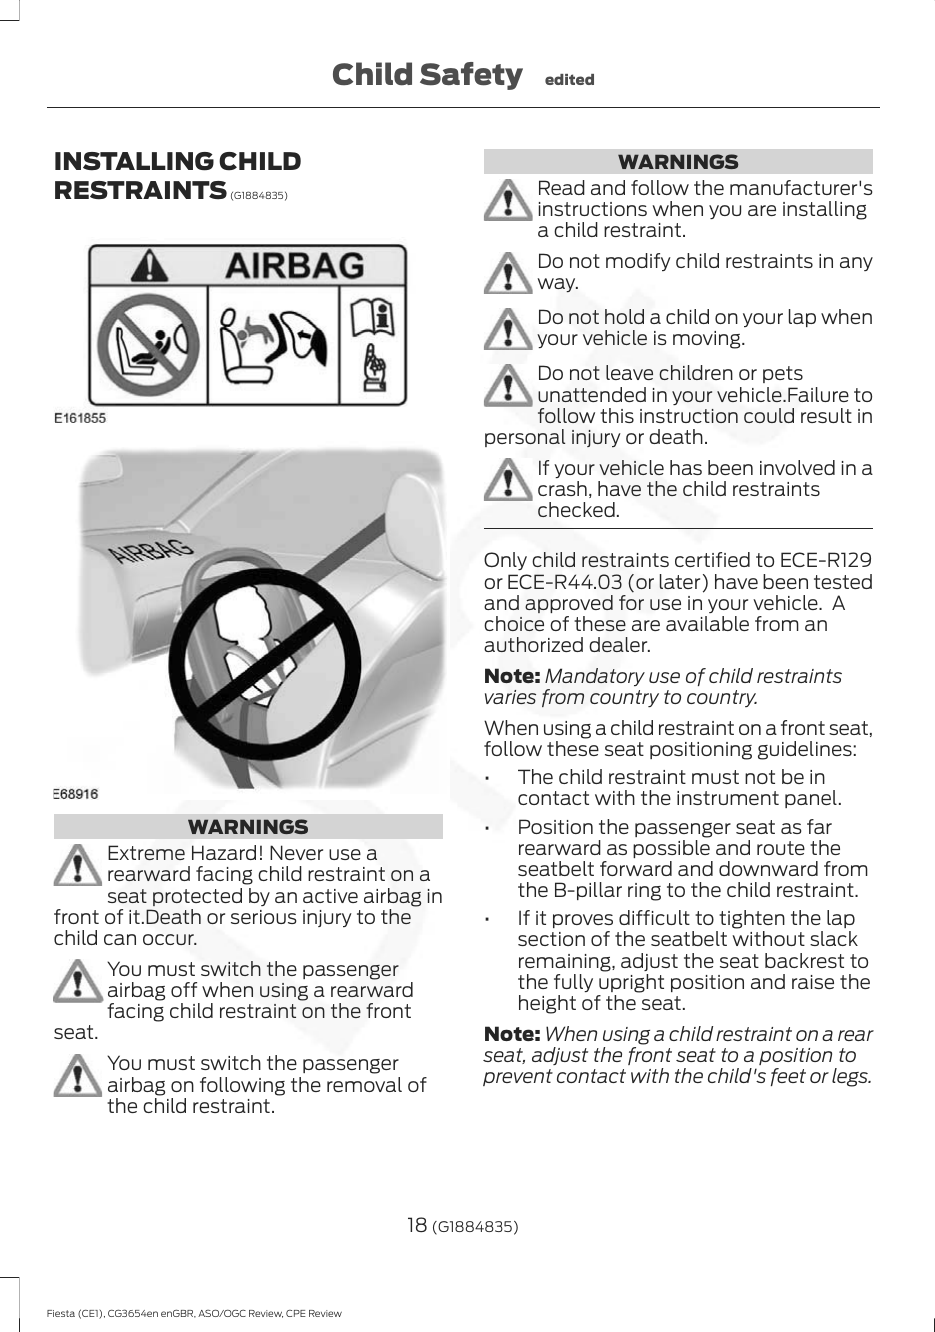 INSTALLING CHILDRESTRAINTS (G1884835)WARNINGSExtreme Hazard! Never use arearward facing child restraint on aseat protected by an active airbag infront of it.Death or serious injury to thechild can occur.You must switch the passengerairbag off when using a rearwardfacing child restraint on the frontseat.You must switch the passengerairbag on following the removal ofthe child restraint.WARNINGSRead and follow the manufacturer&apos;sinstructions when you are installinga child restraint.Do not modify child restraints in anyway.Do not hold a child on your lap whenyour vehicle is moving.Do not leave children or petsunattended in your vehicle.Failure tofollow this instruction could result inpersonal injury or death.If your vehicle has been involved in acrash, have the child restraintschecked.Only child restraints certified to ECE-R129or ECE-R44.03 (or later) have been testedand approved for use in your vehicle.  Achoice of these are available from anauthorized dealer.Note: Mandatory use of child restraintsvaries from country to country.When using a child restraint on a front seat,follow these seat positioning guidelines:• The child restraint must not be incontact with the instrument panel.• Position the passenger seat as farrearward as possible and route theseatbelt forward and downward fromthe B-pillar ring to the child restraint.• If it proves difficult to tighten the lapsection of the seatbelt without slackremaining, adjust the seat backrest tothe fully upright position and raise theheight of the seat.Note: When using a child restraint on a rearseat, adjust the front seat to a position toprevent contact with the child&apos;s feet or legs.18 (G1884835)Fiesta (CE1), CG3654en enGBR, ASO/OGC Review, CPE ReviewChild Safety edited